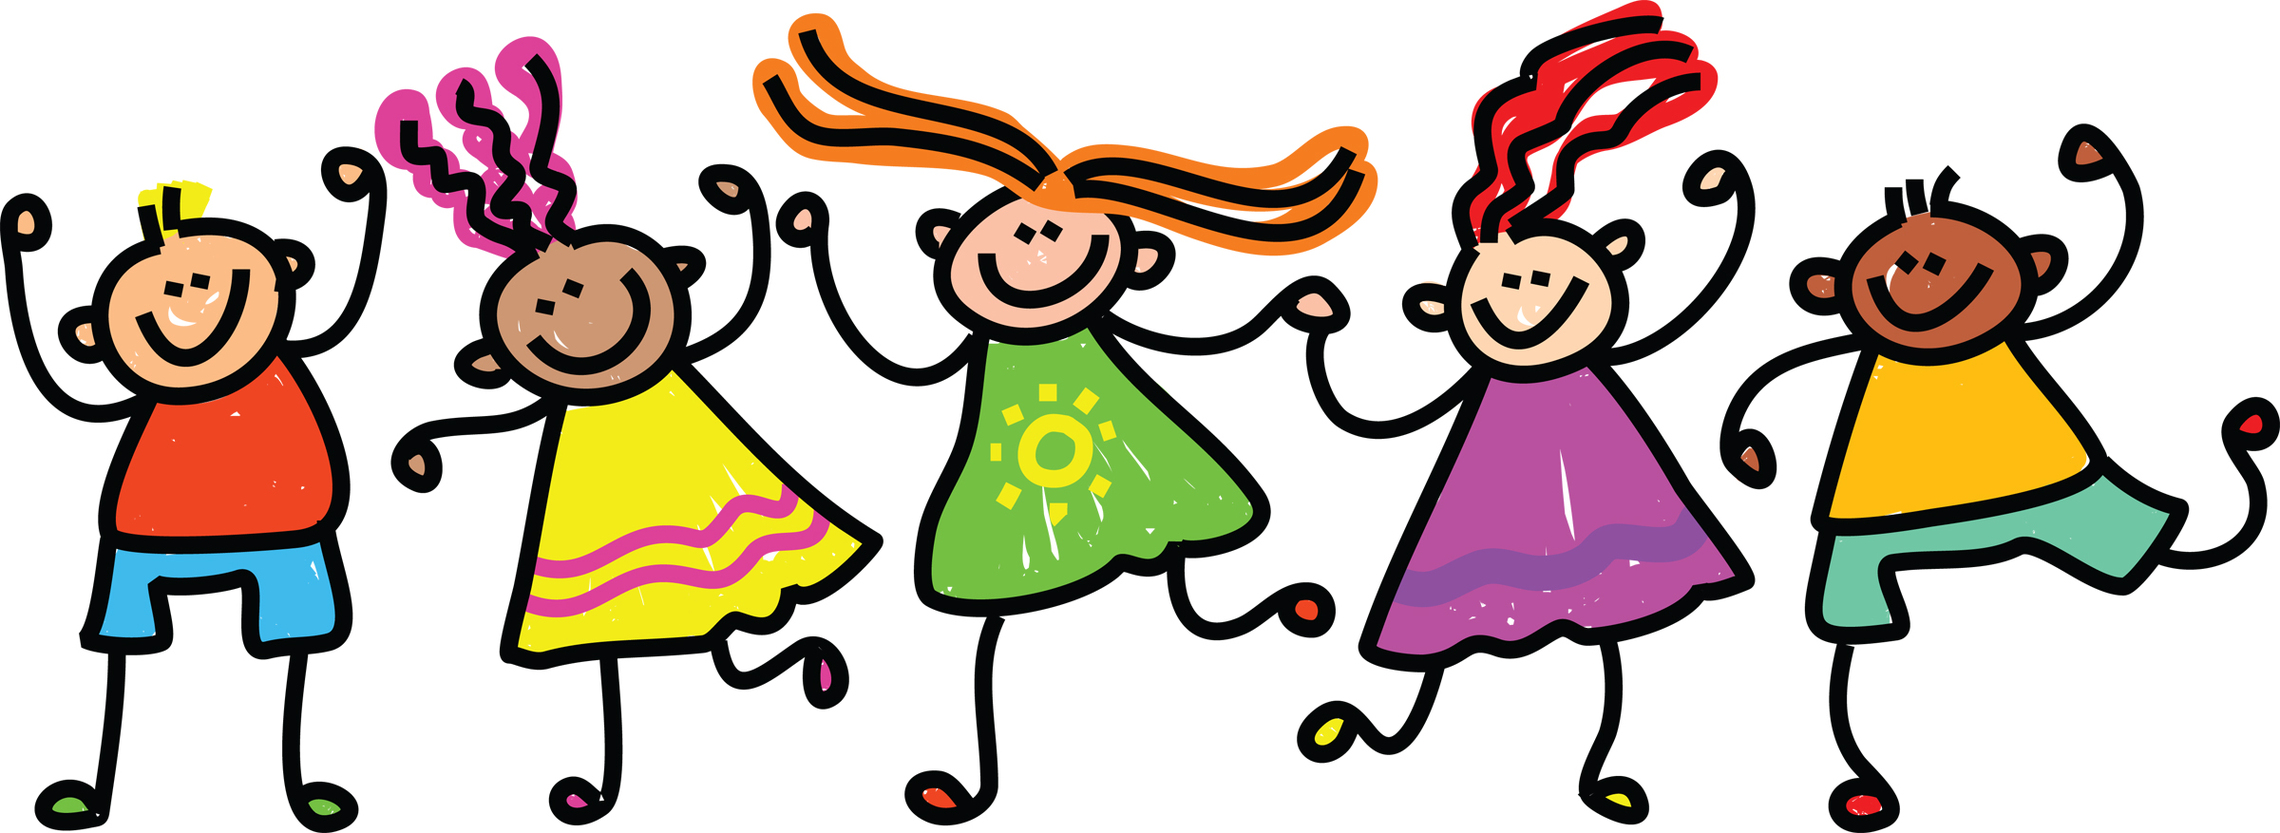 Picture Of Children Holding Hands Clipart - Free to use Clip Art ...